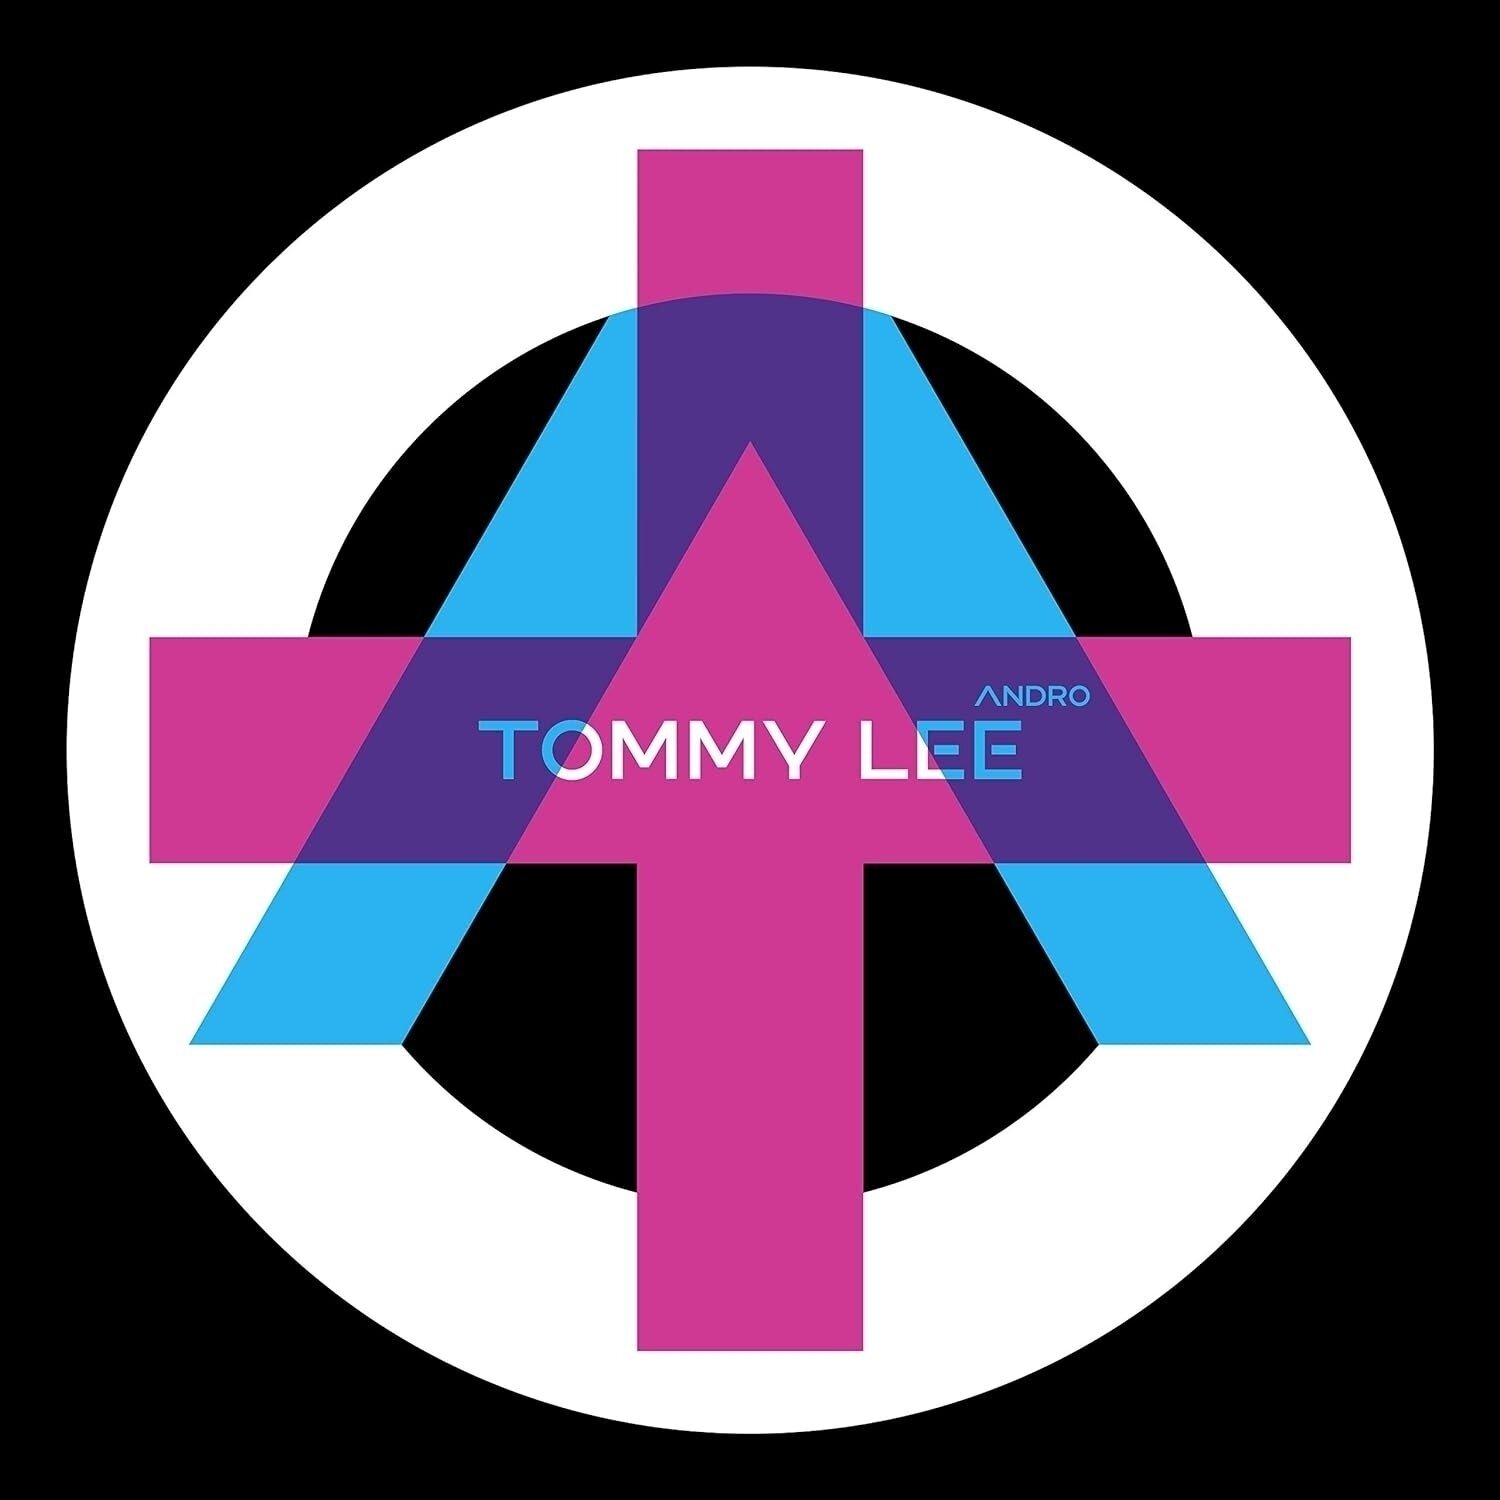 Płyta winylowa Tommy Lee - Andro (Clear w/ Pink & Blue Splatter Coloured) (LP)